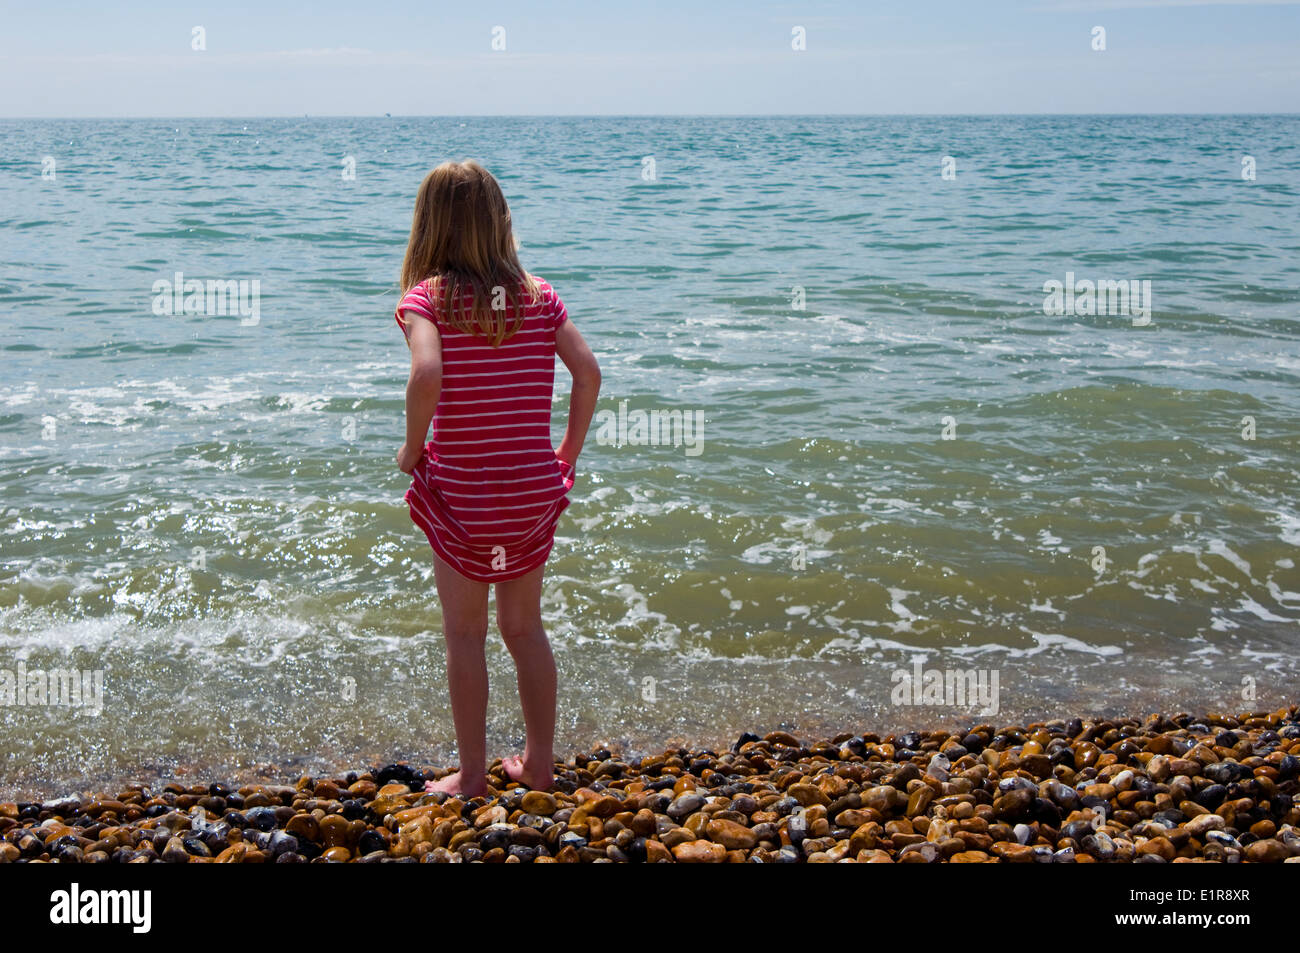 young girl holding up her dress ready to paddle in the sea Stock Photo